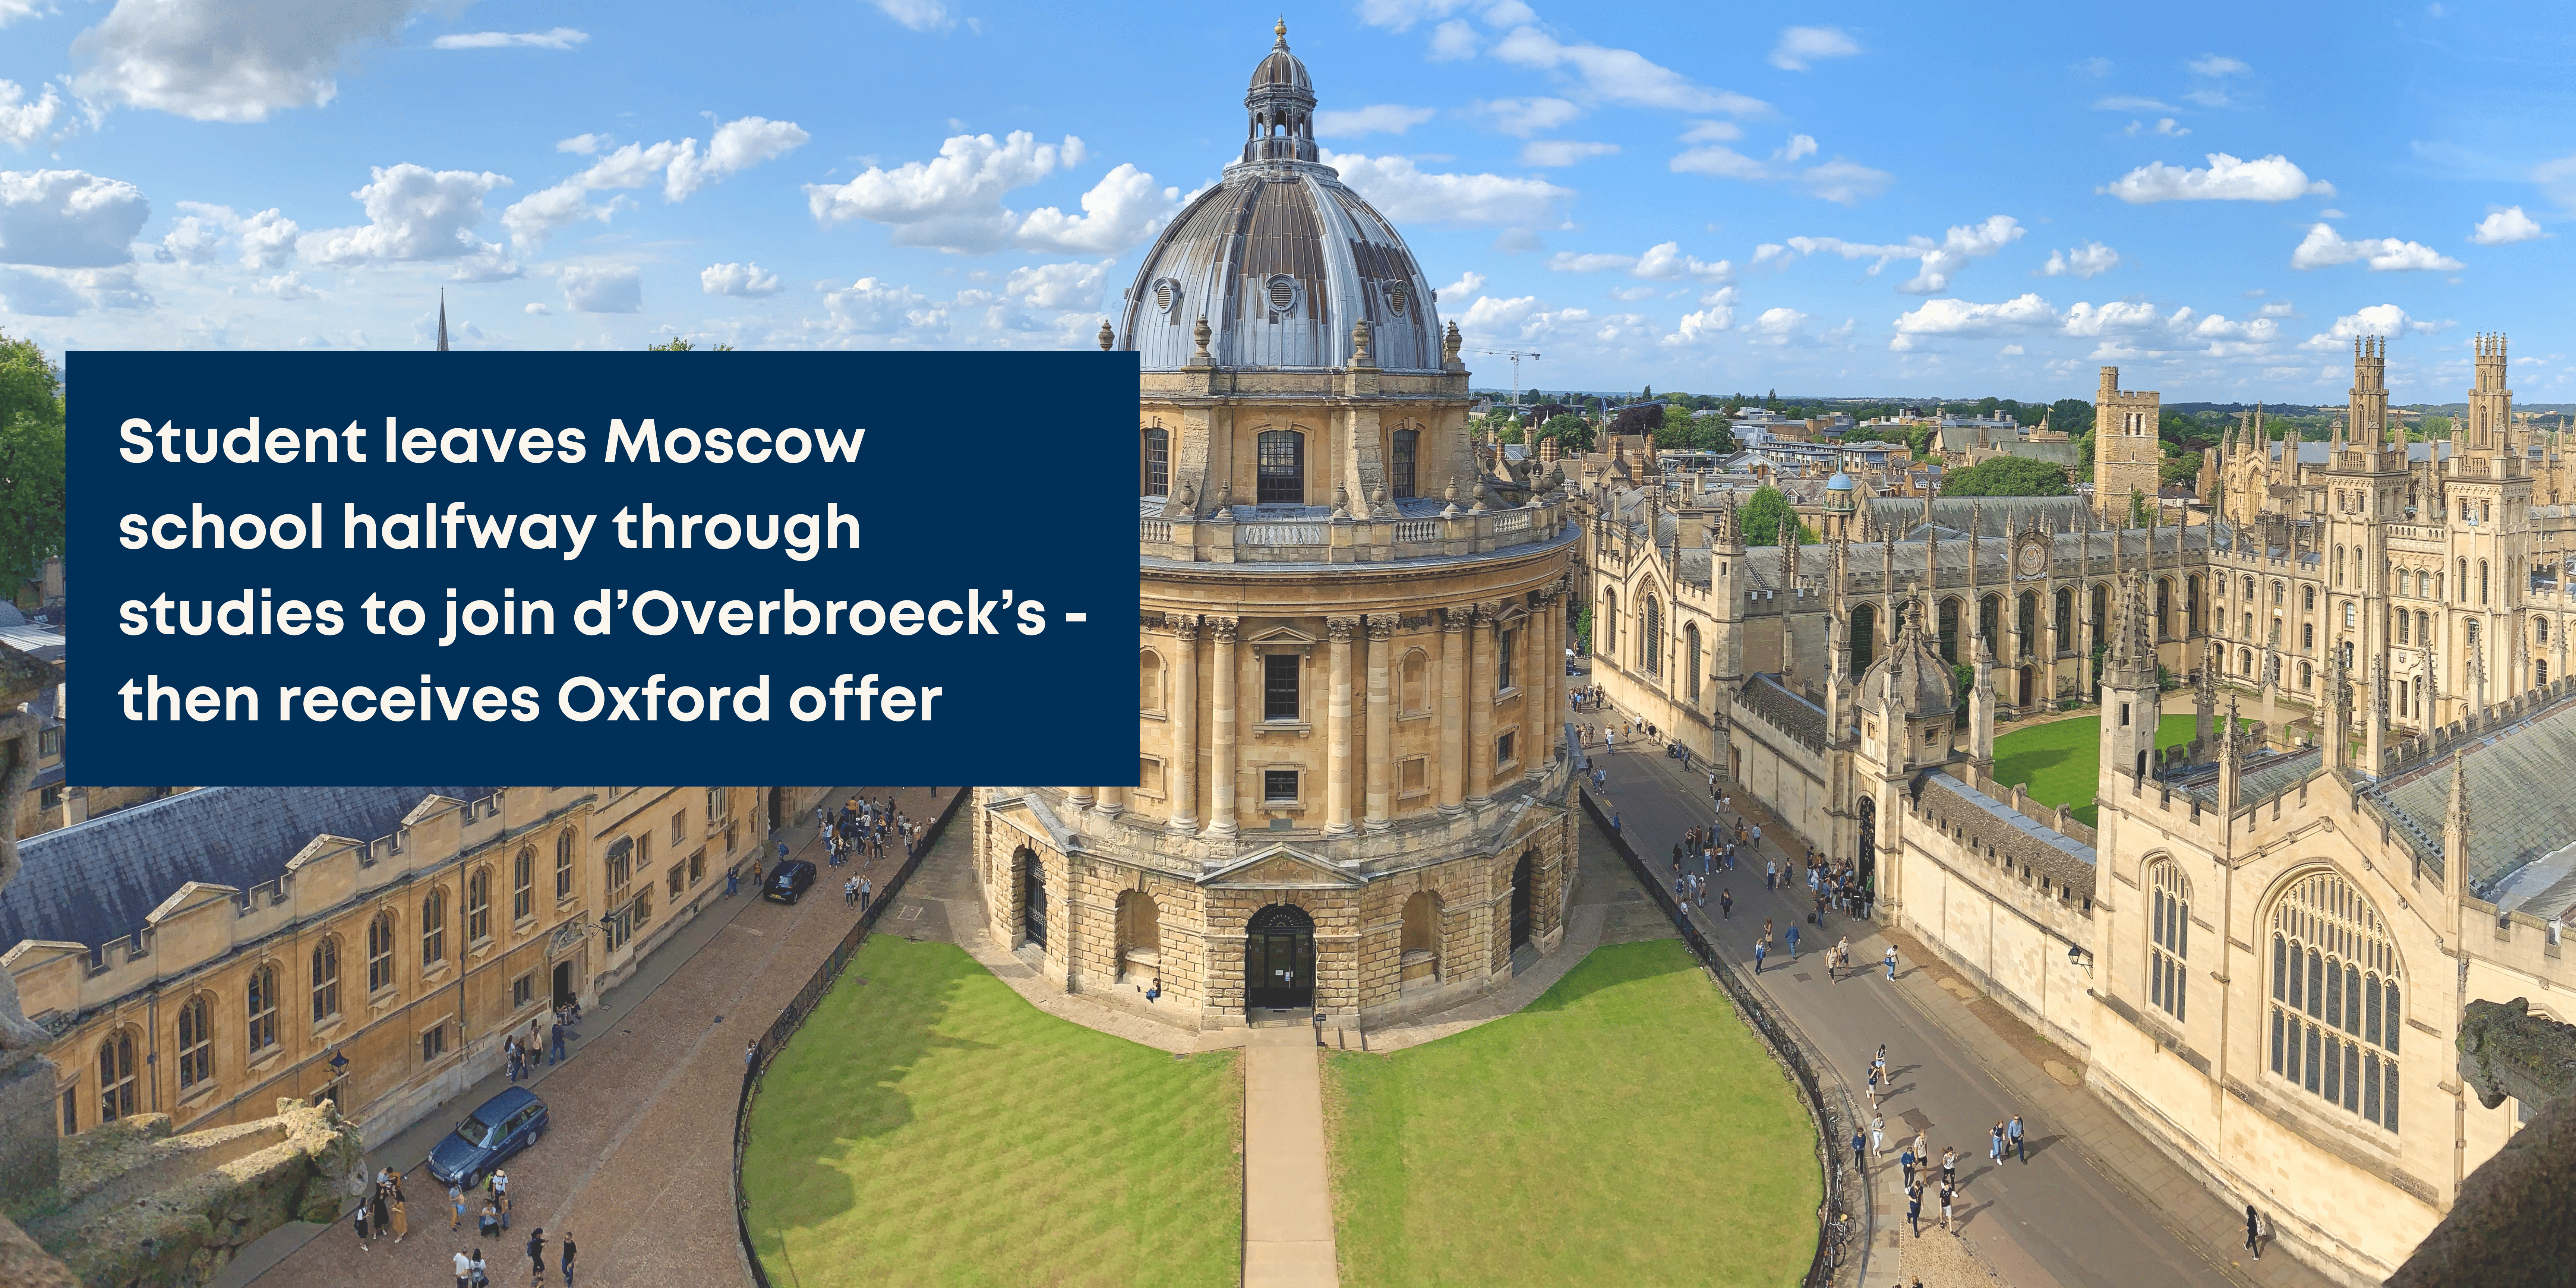 Student leaves Moscow school halfway through studies to join d’Overbroeck’s - then receives Oxford offer-giulia-receives-oxford-offer-Student-leaves-Moscow-school-halfway-through-studies-to-join-dOverbroecks-then-receives-Oxford-offer